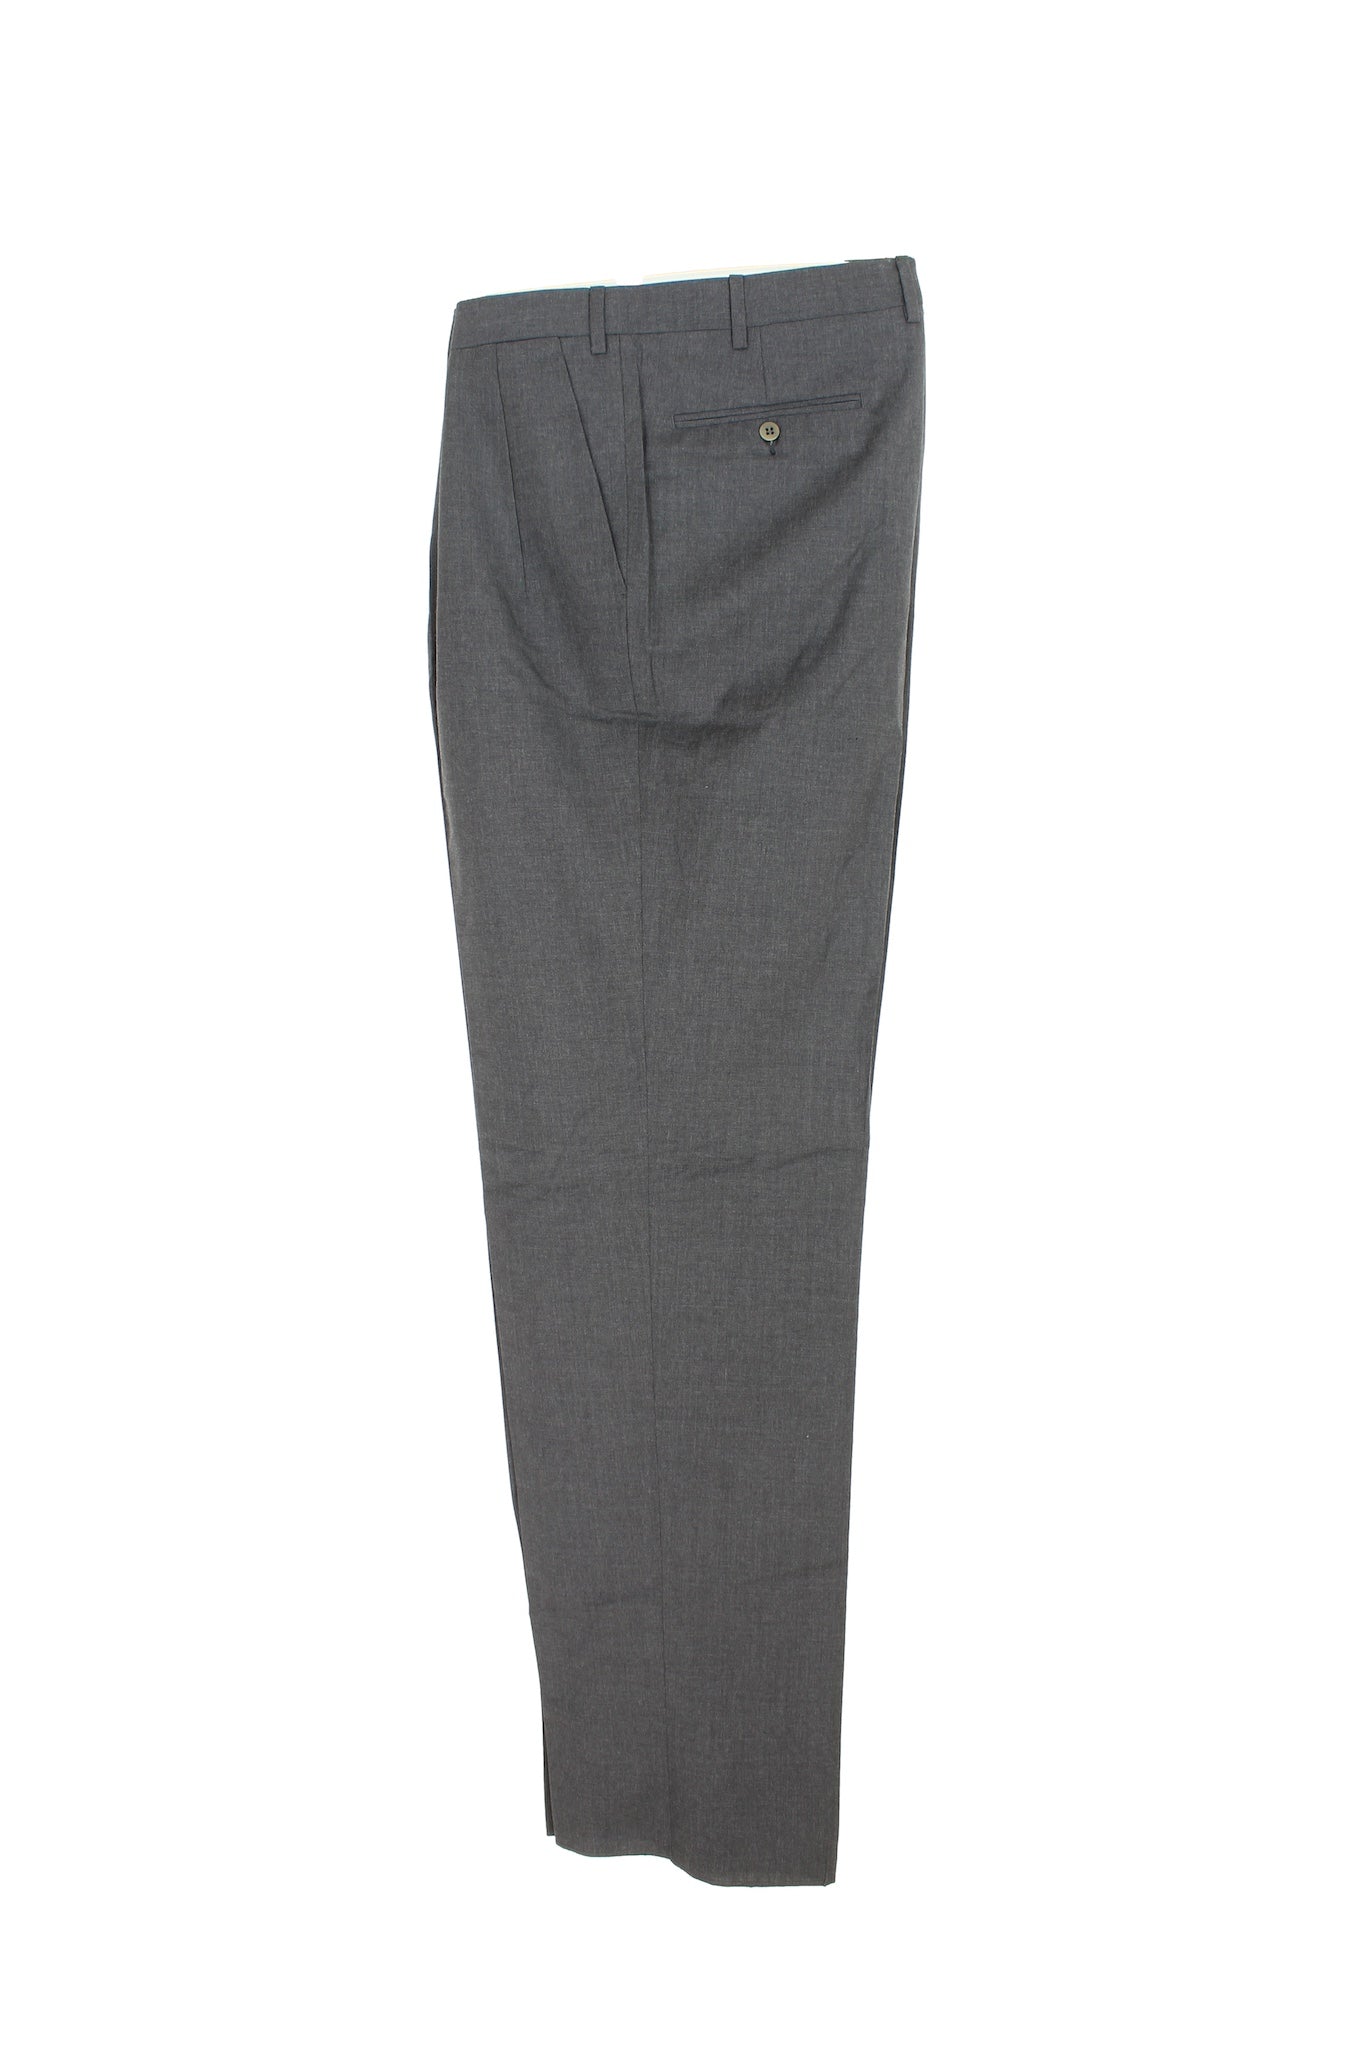 Burberry Grey Wool Classic Trousers Vintage 90s